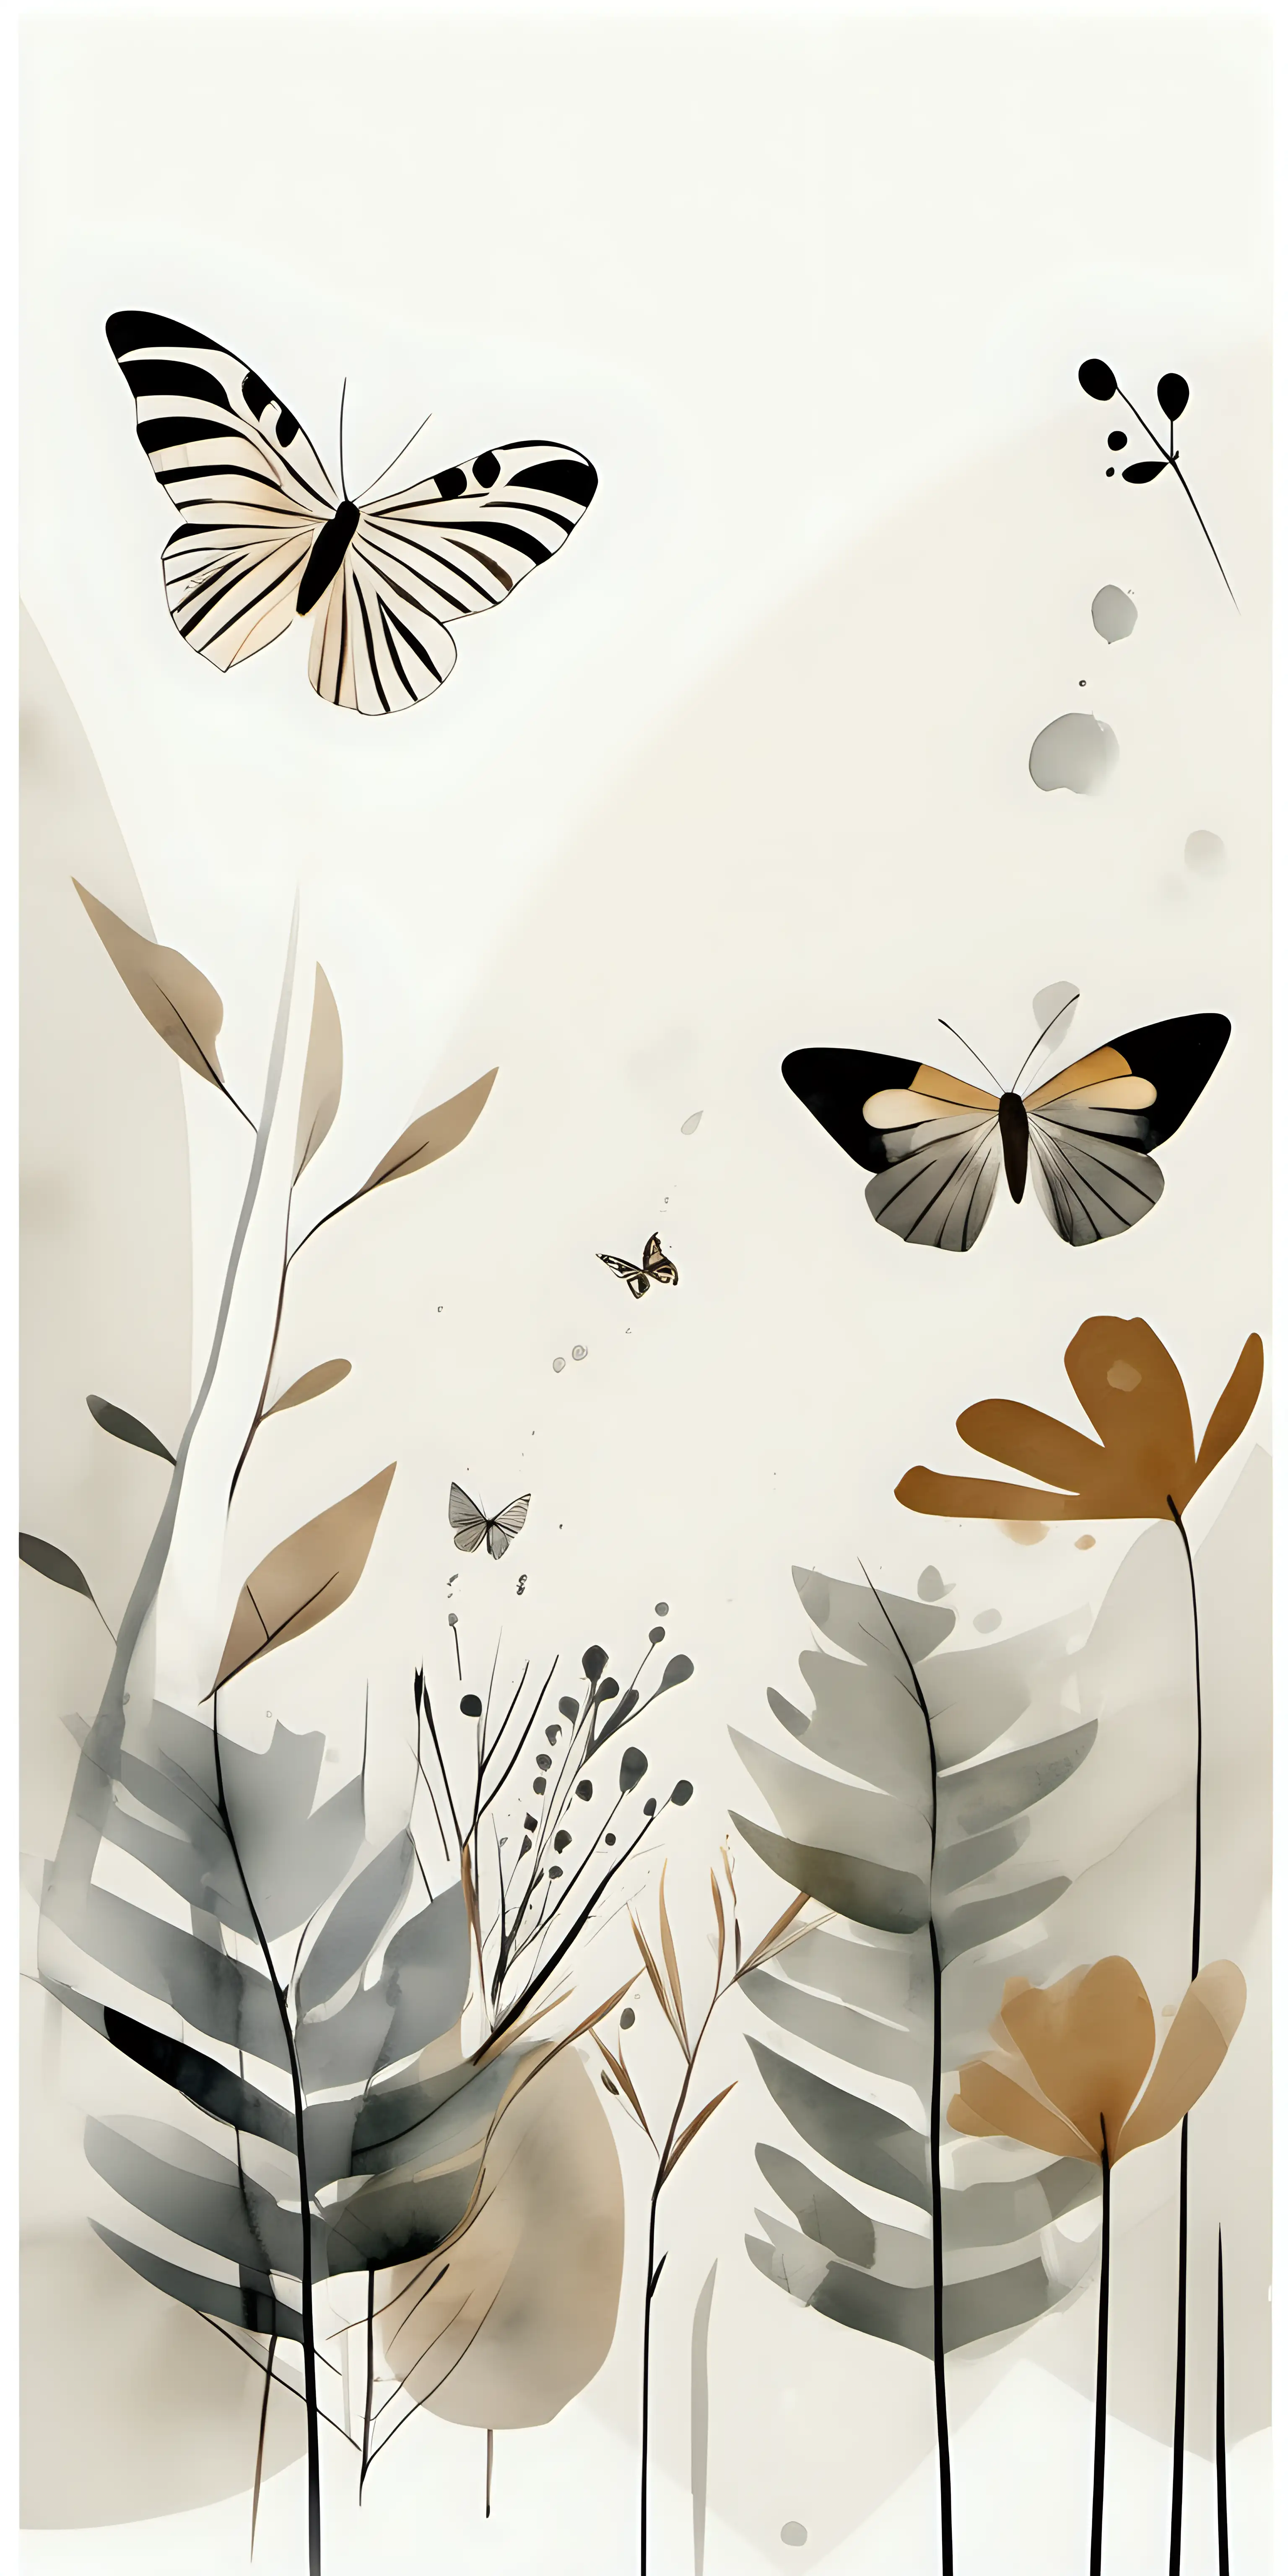 Minimalist Japandi art piece, embodying a harmonious blend of Japanese and Scandinavian aesthetics featuring butterflies, surrounded by various plant motifs including wildflowers. Visible brush strokes, neutral shapes on white background. Emphasize thick, deliberate lines for a minimalistic and clean look. Incorporate muted tones in a watercolor style, with a composition of stripes and shapes. The artwork should demonstrate juxtaposed elements, showcasing a clever use of negative space to create balance and serenity. The overall feel should be calming and refined, capturing the essence of both Japanese simplicity and Scandinavian functionality in a gallery art setting.